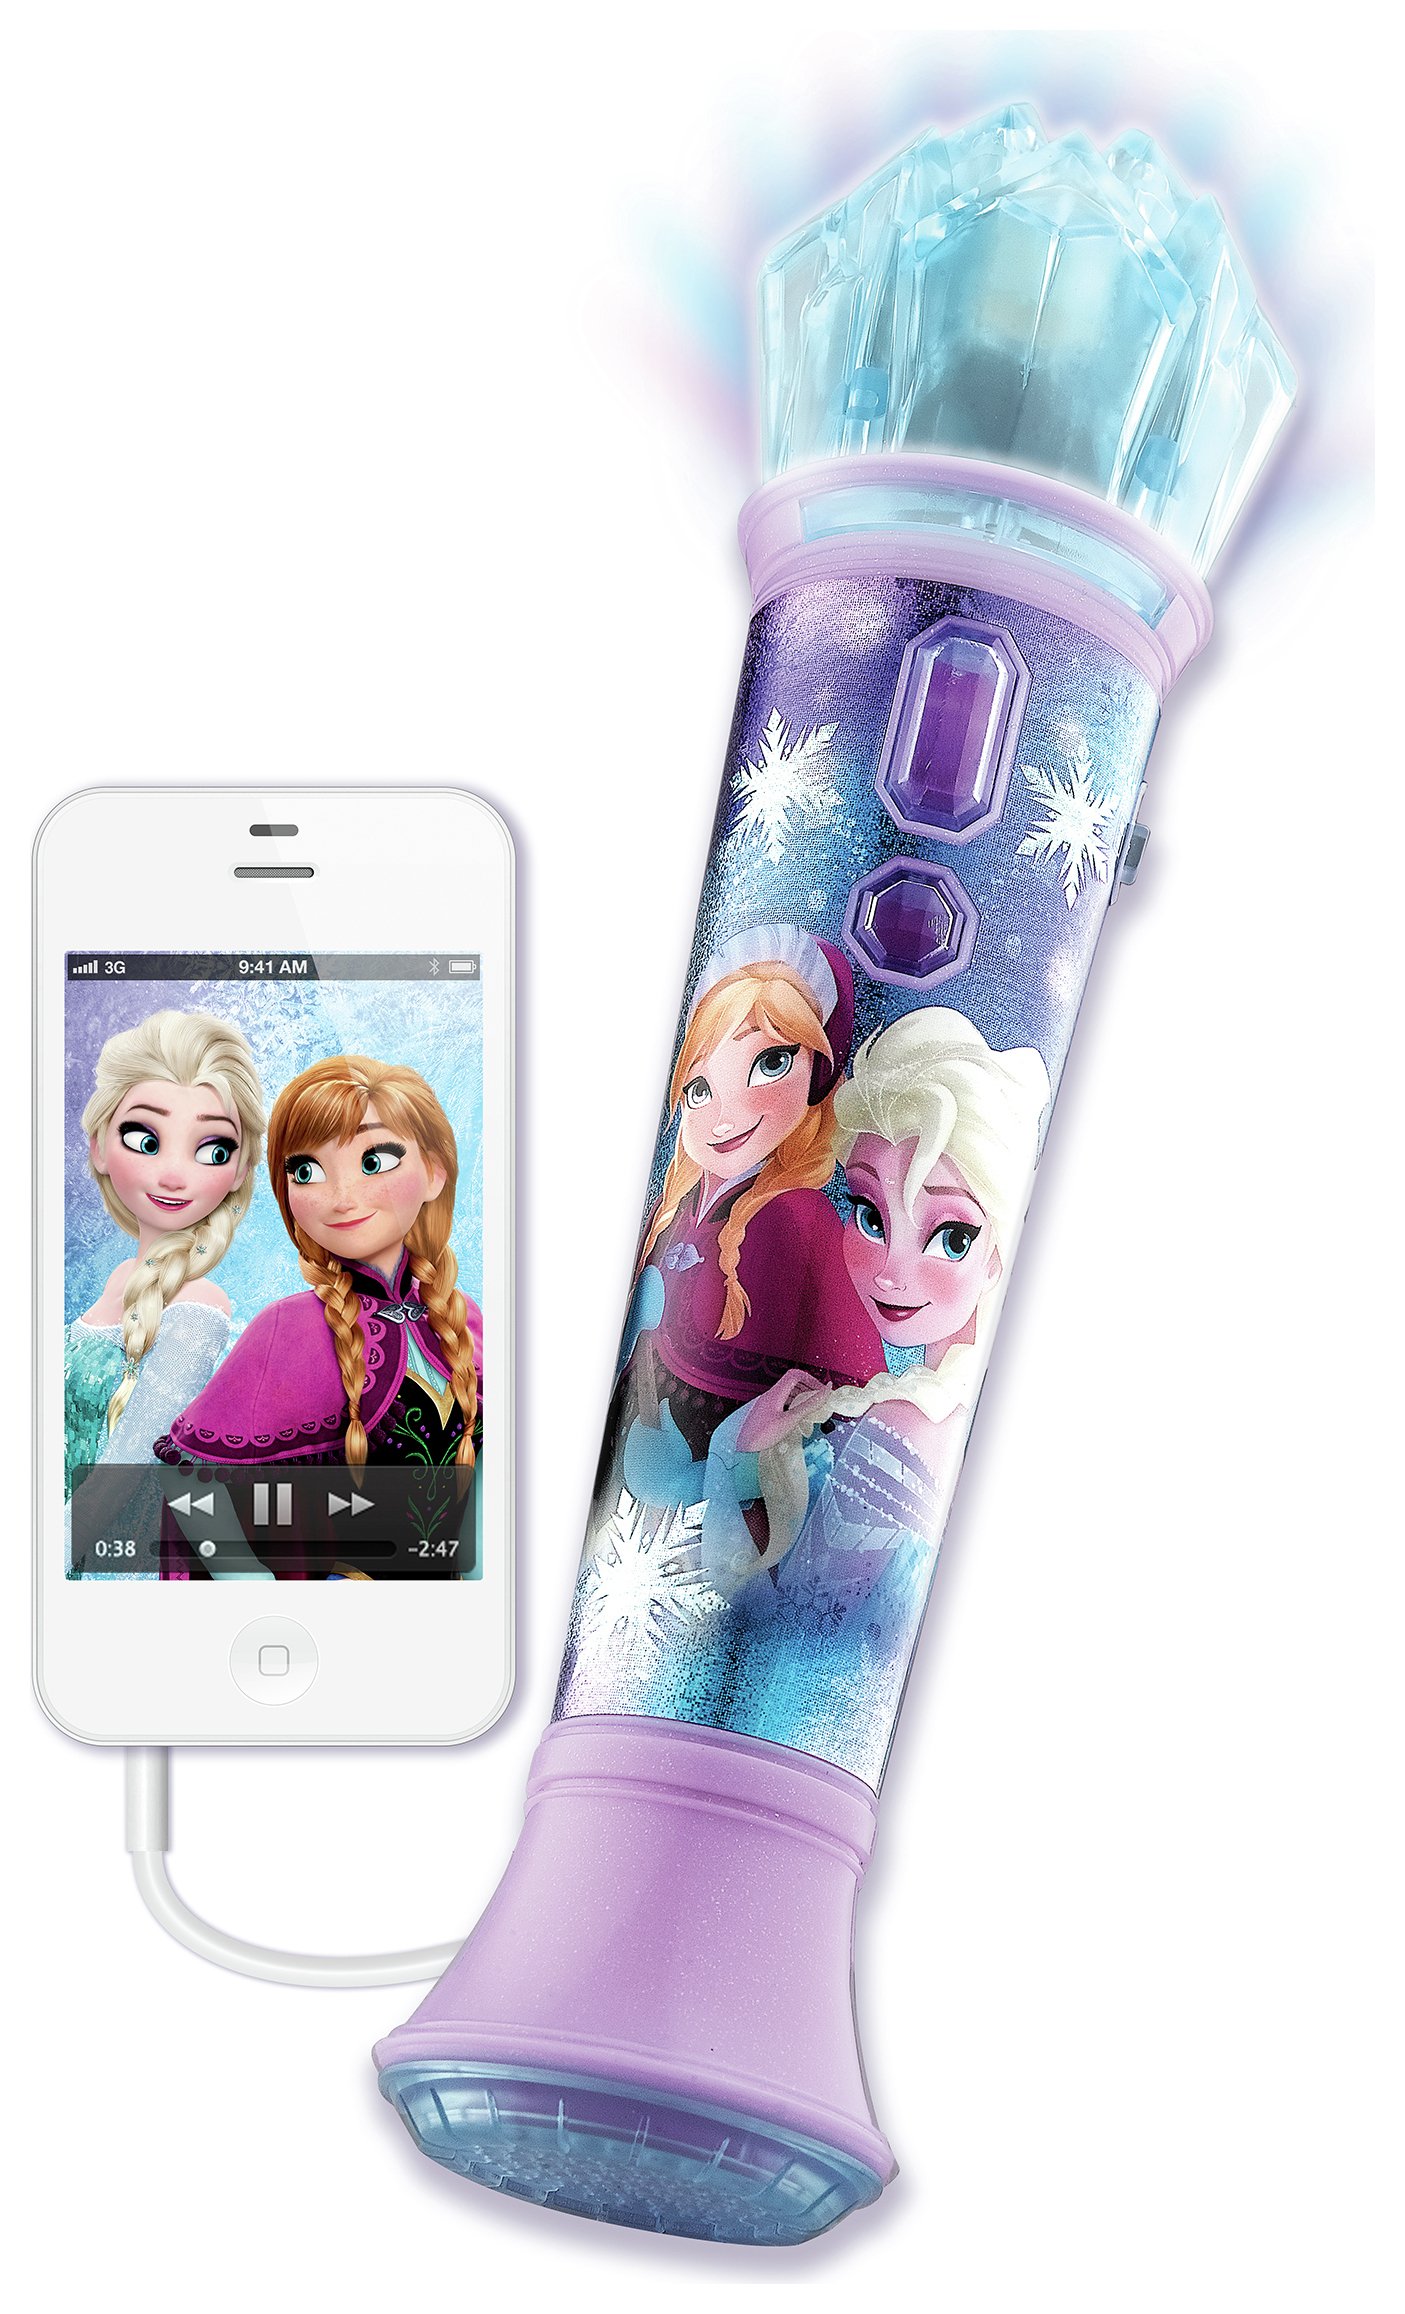 Disney Frozen - Magical Microphone Review